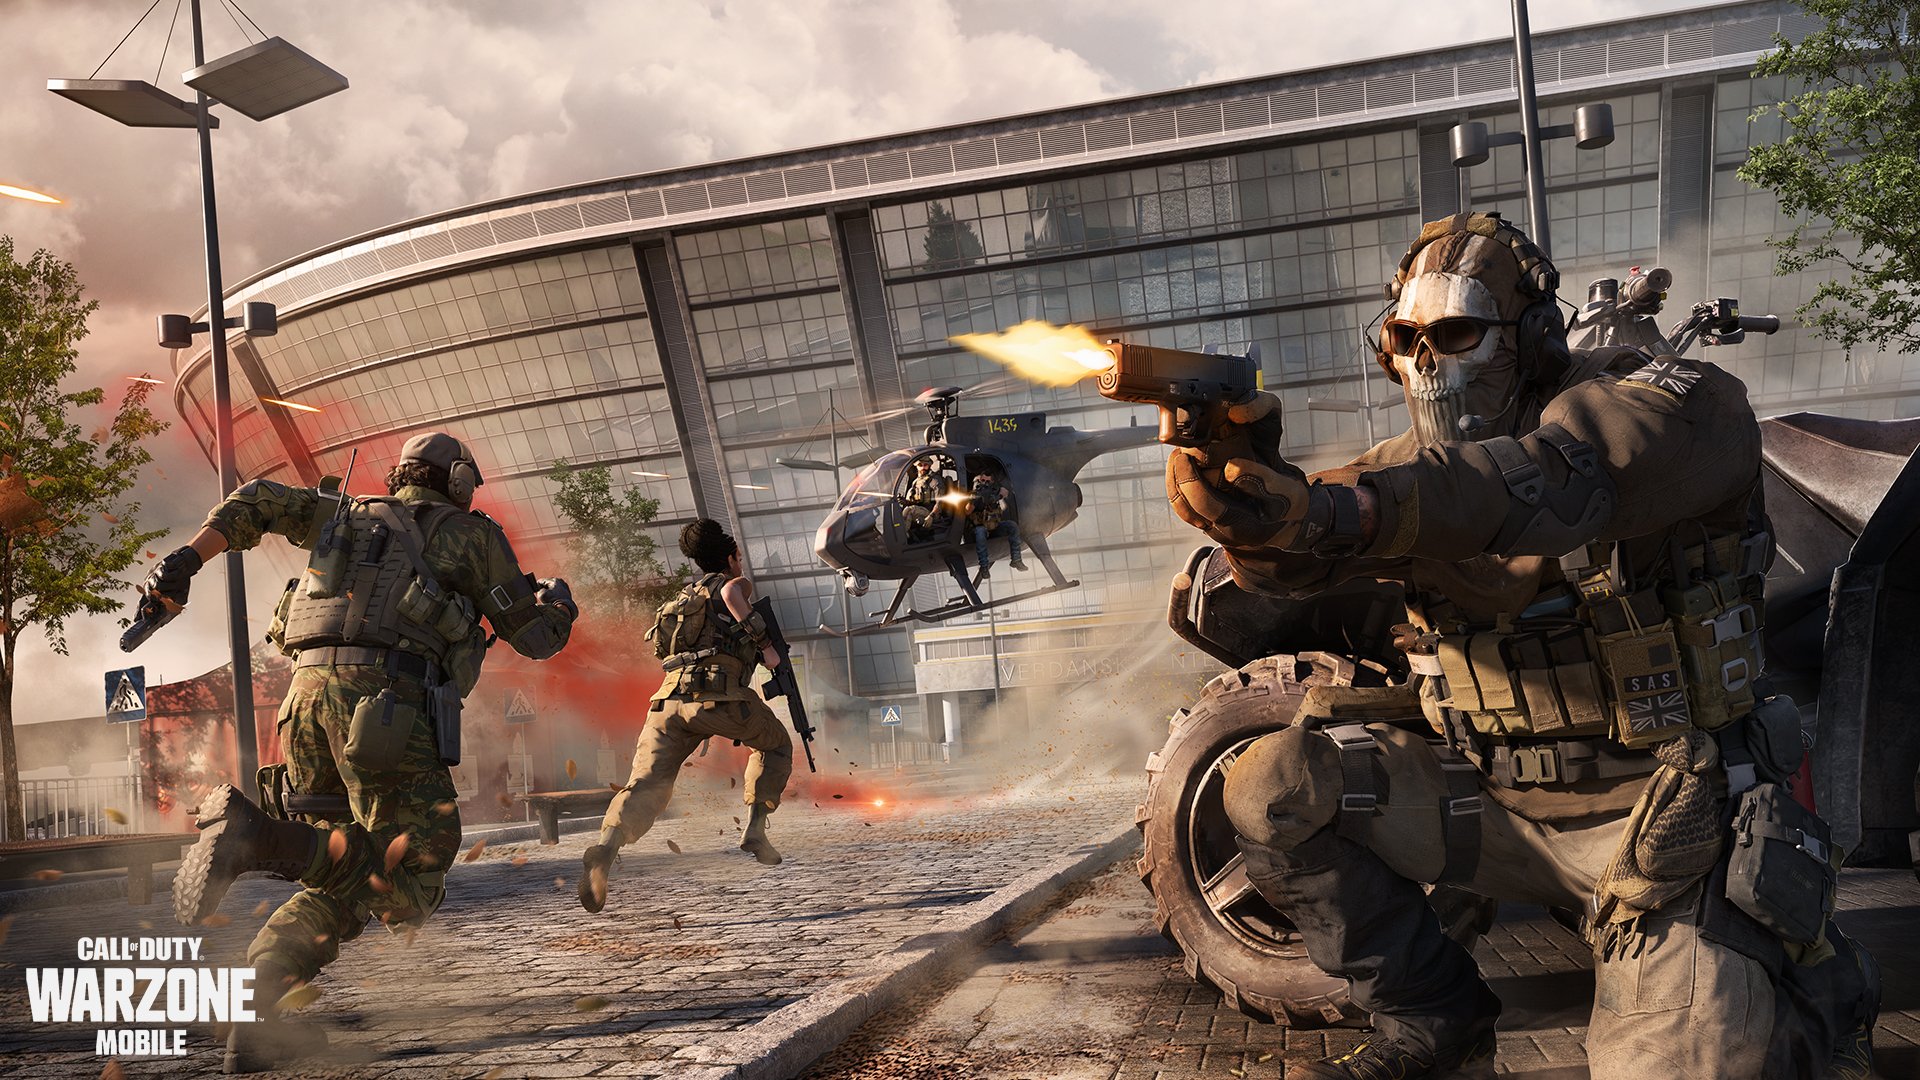 Activision insists Call of Duty Mobile will be supported 'for the